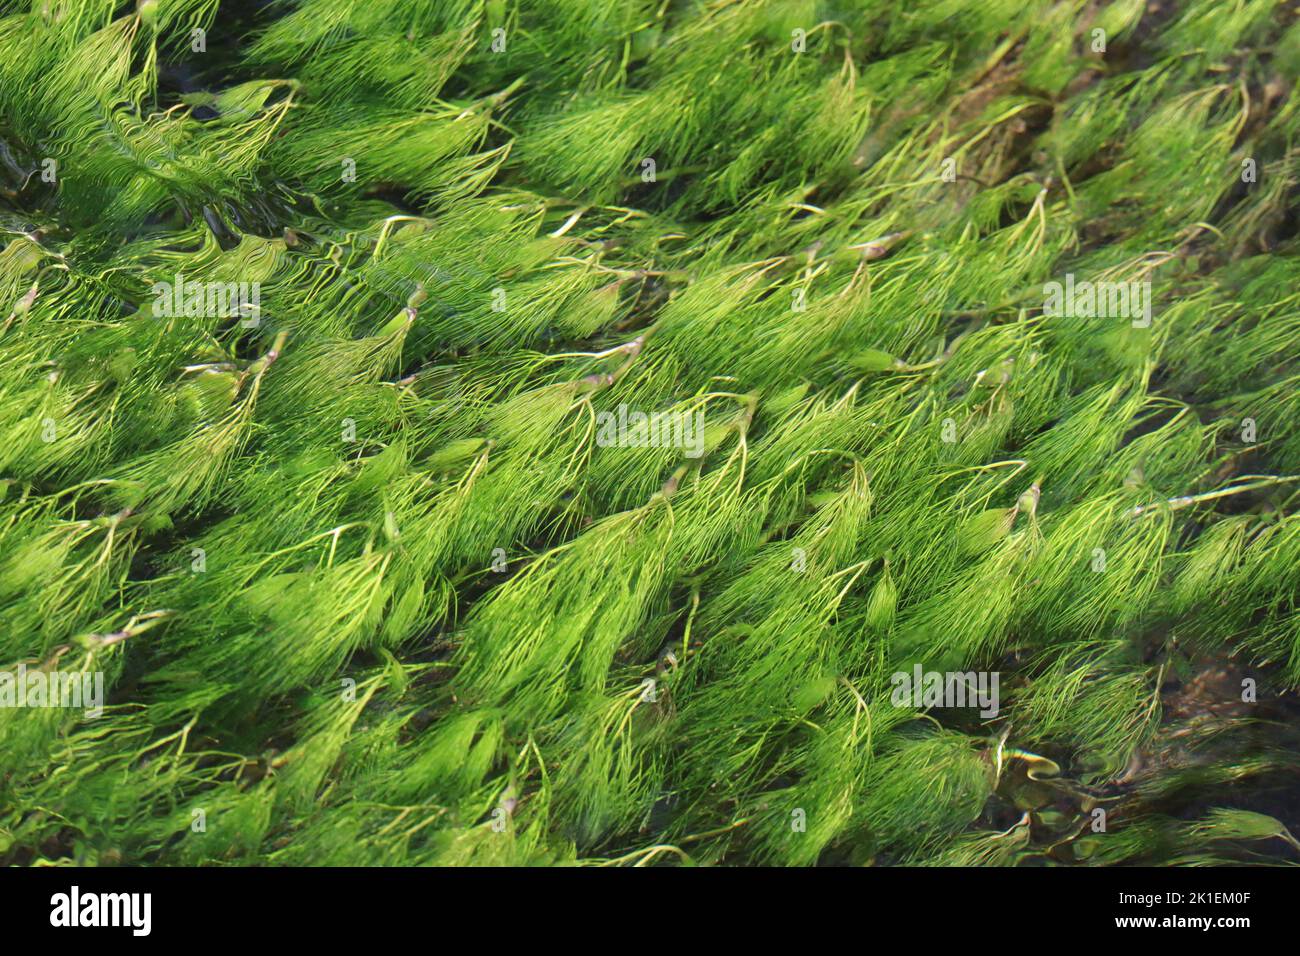 Seaweed in a shallow Stream Stock Photo